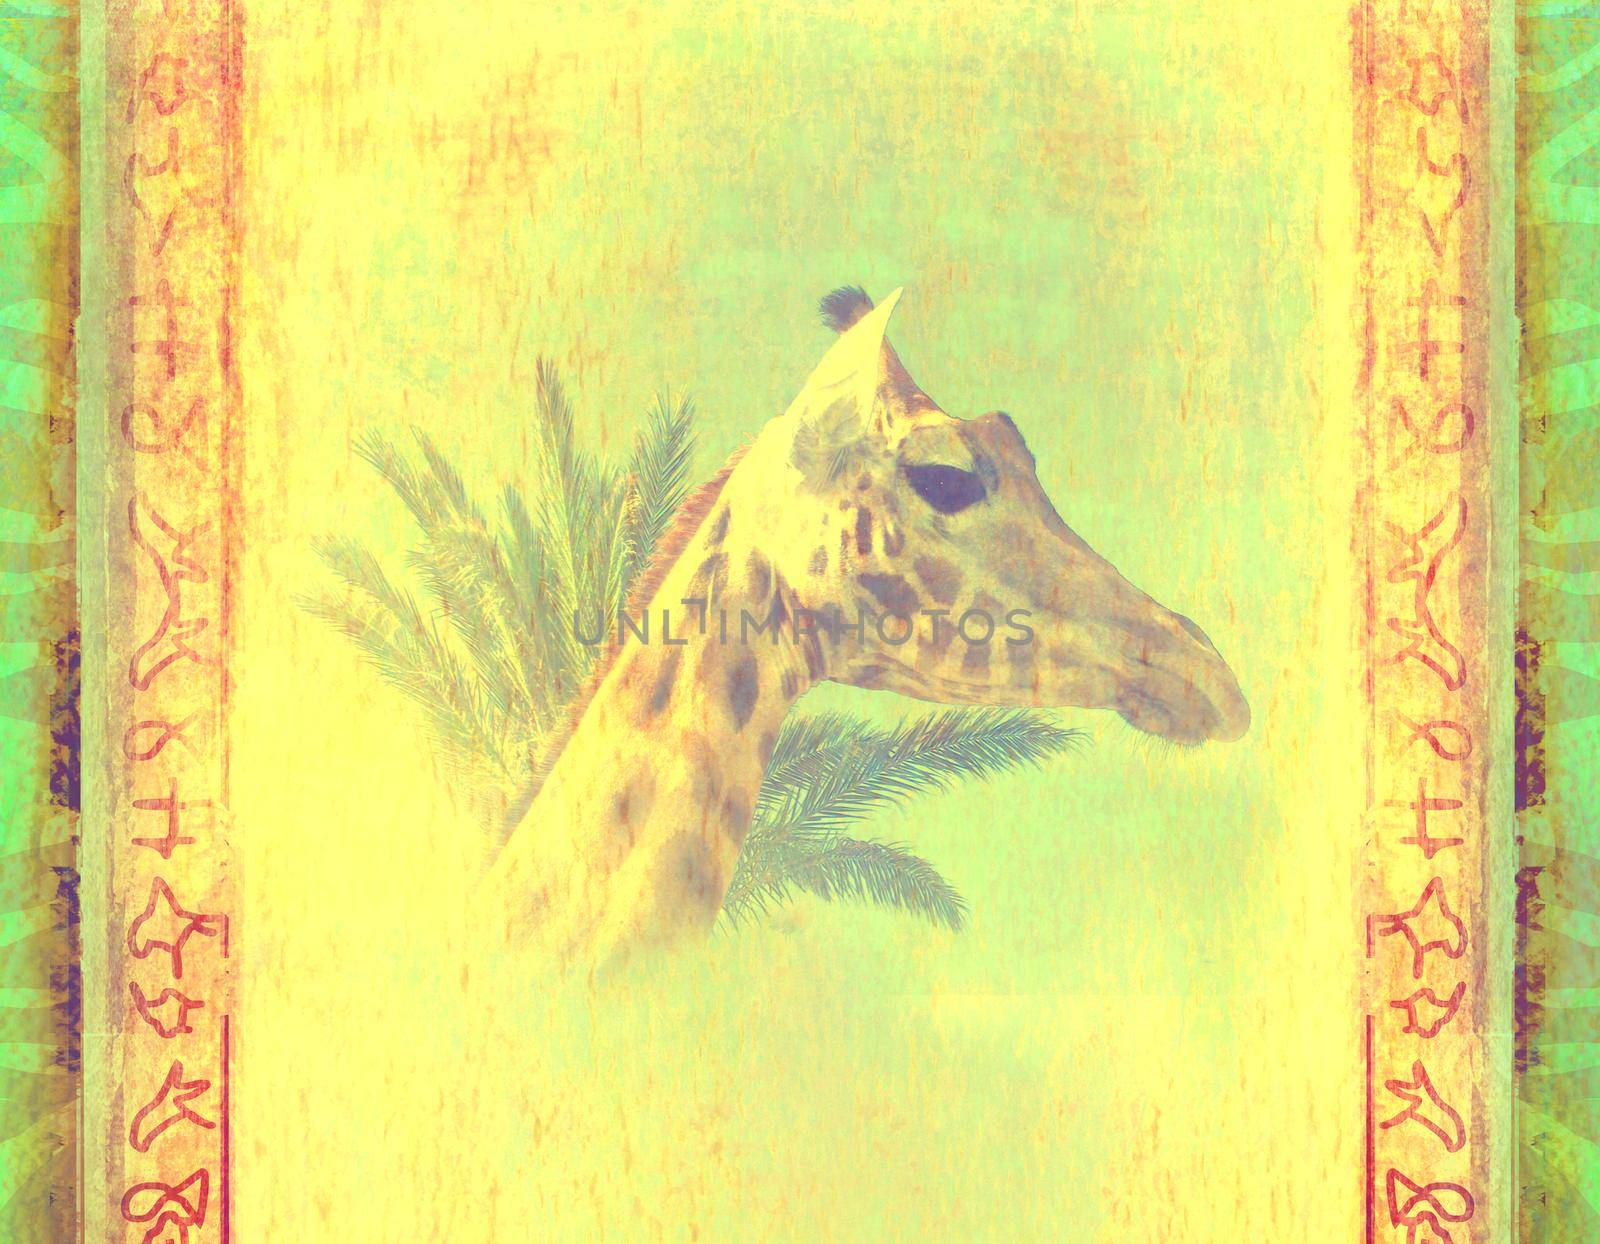 grunge background with giraffe and palm by JackyBrown